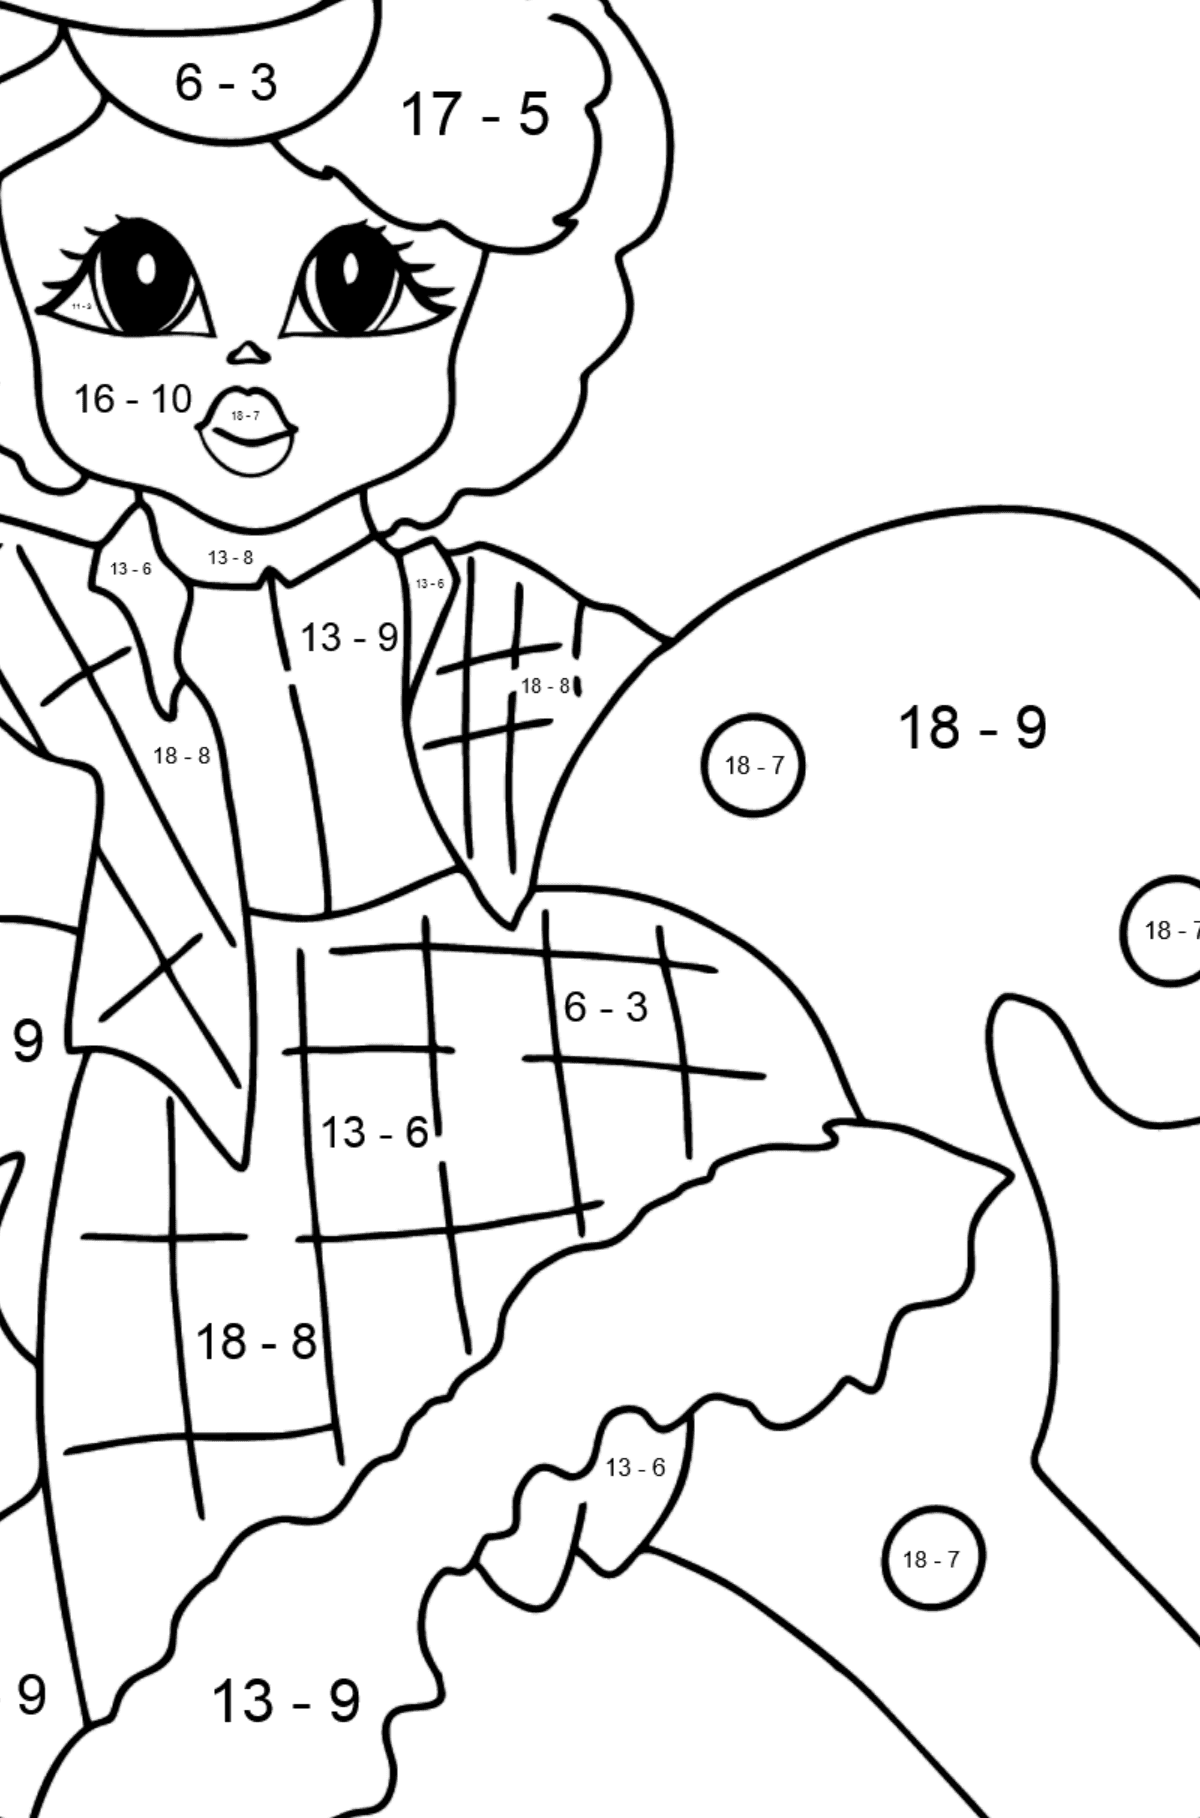 Coloring Page - A Princess on a Horse - Math Coloring - Subtraction for Kids